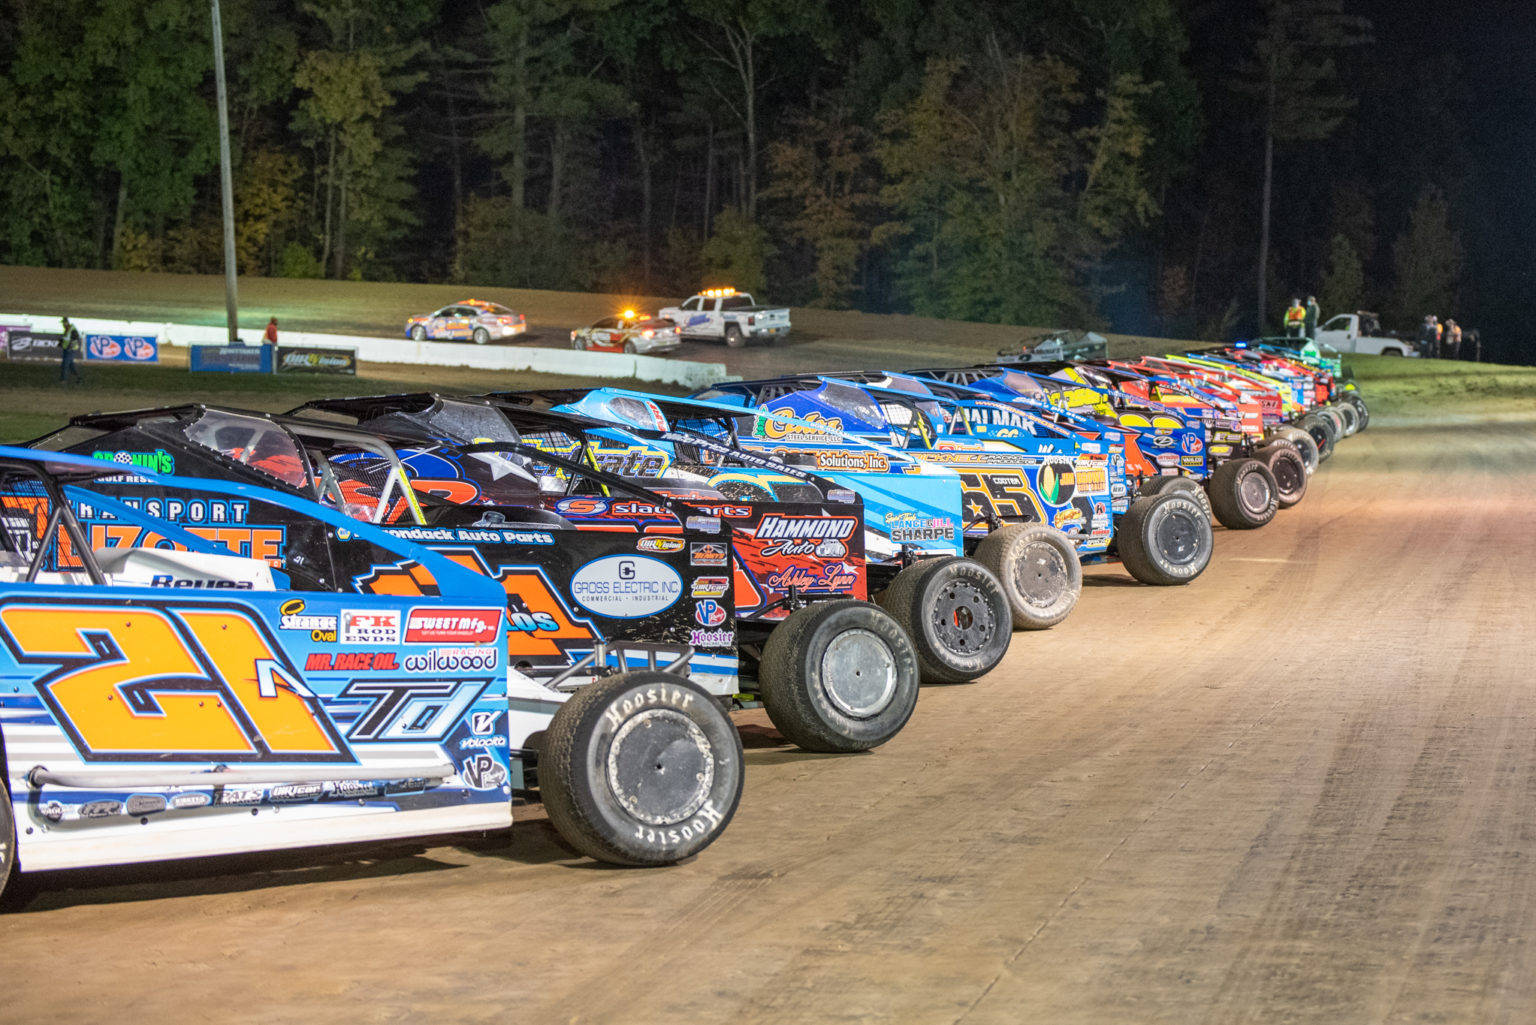 A Line Of Dirt Track Racing Cars At Night Wallpaper